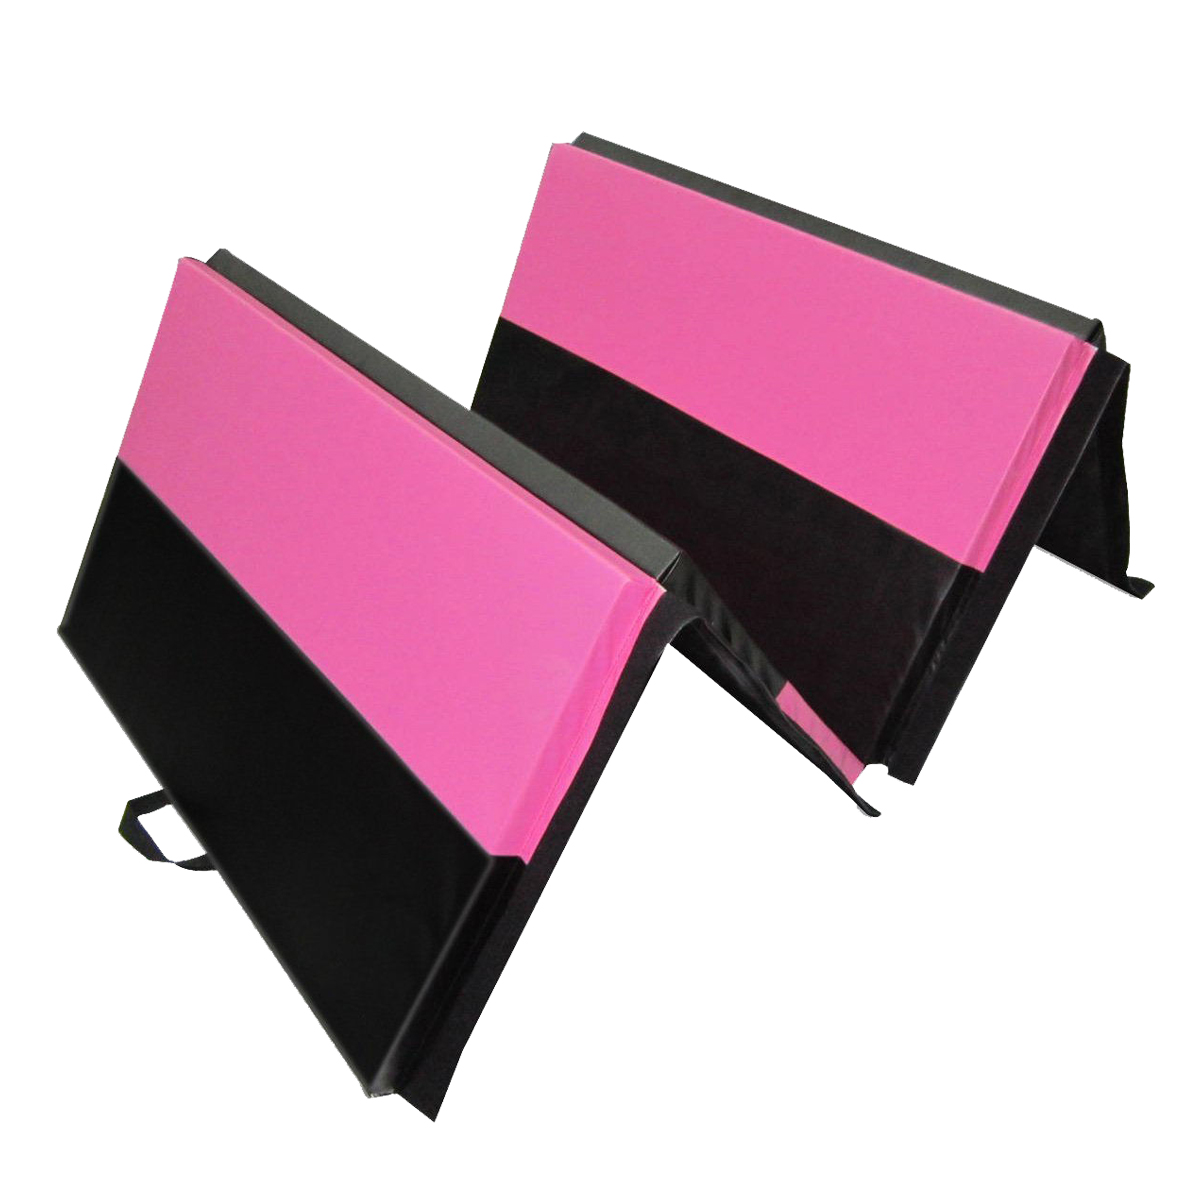 70x47x197inch-Foldable-Gymnastic-Mat-Exercise-Yoga-Fitness-Workout-Tumbling-Pad-1245140-7